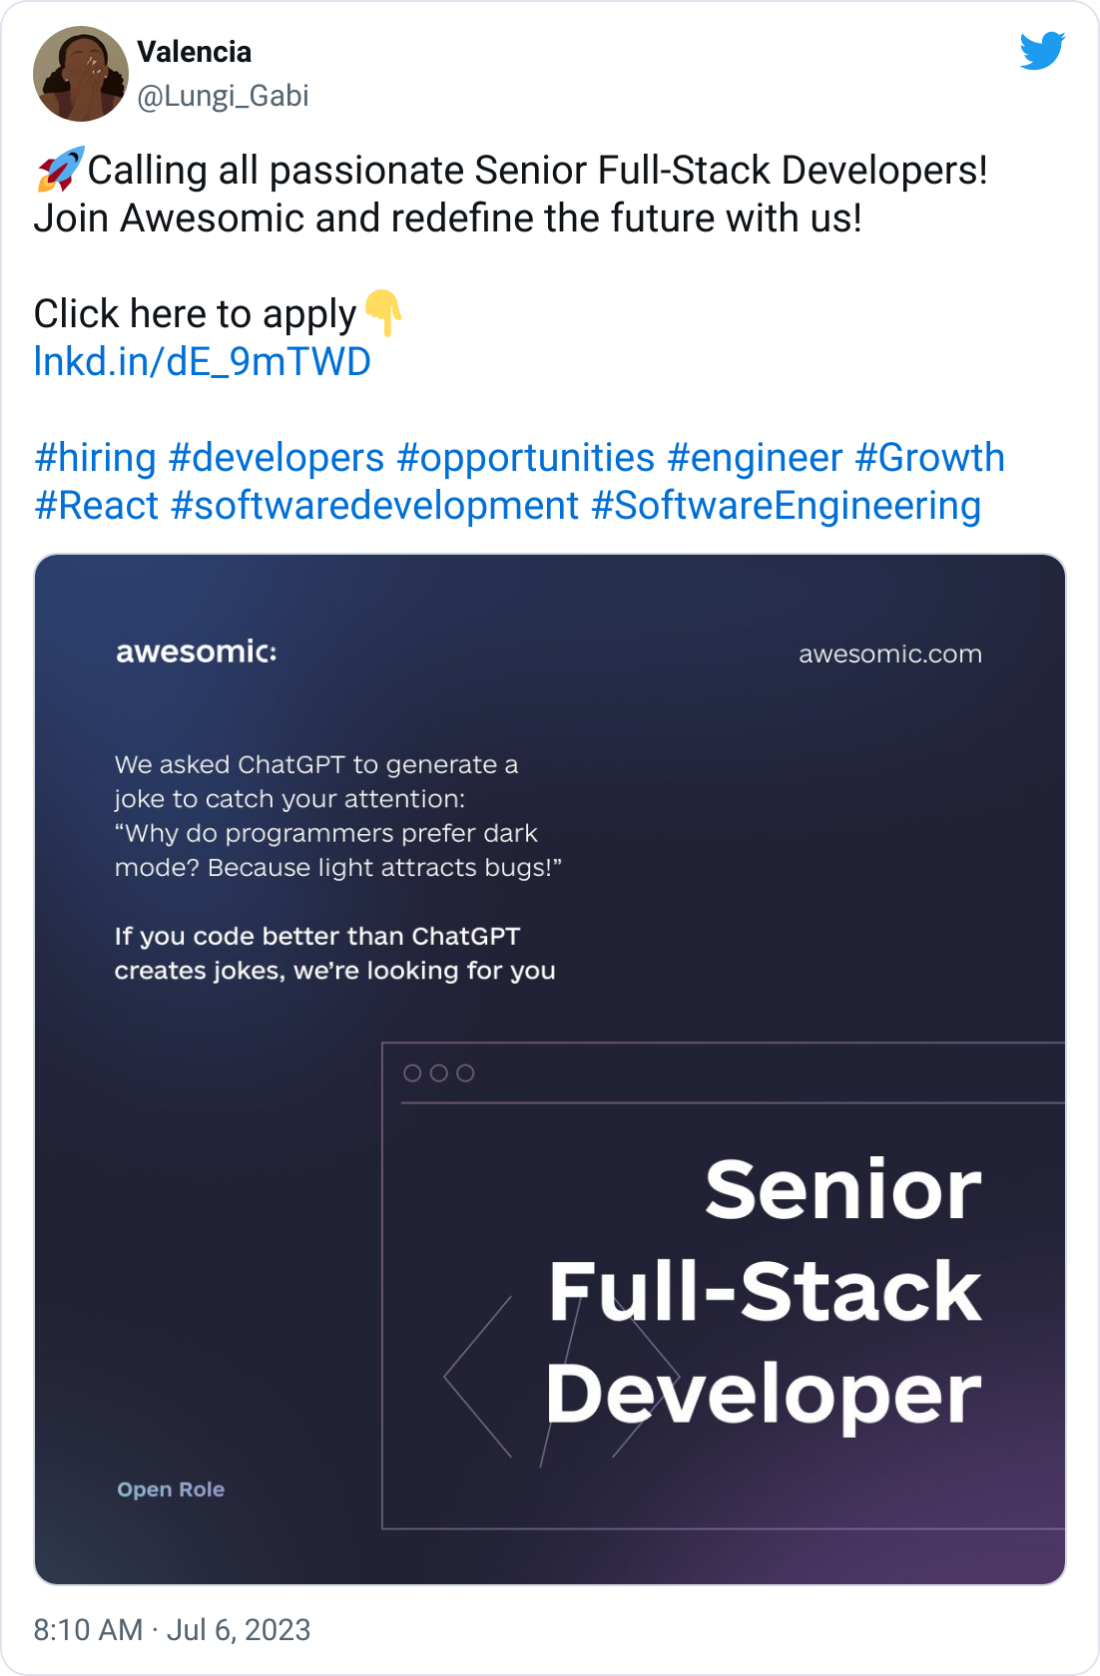 Valencia @Lungi_Gabi 🚀Calling all passionate Senior Full-Stack Developers! Join Awesomic and redefine the future with us!  Click here to apply👇 https://lnkd.in/dE_9mTWD  #hiring #developers #opportunities #engineer #Growth #React #softwaredevelopment #SoftwareEngineering